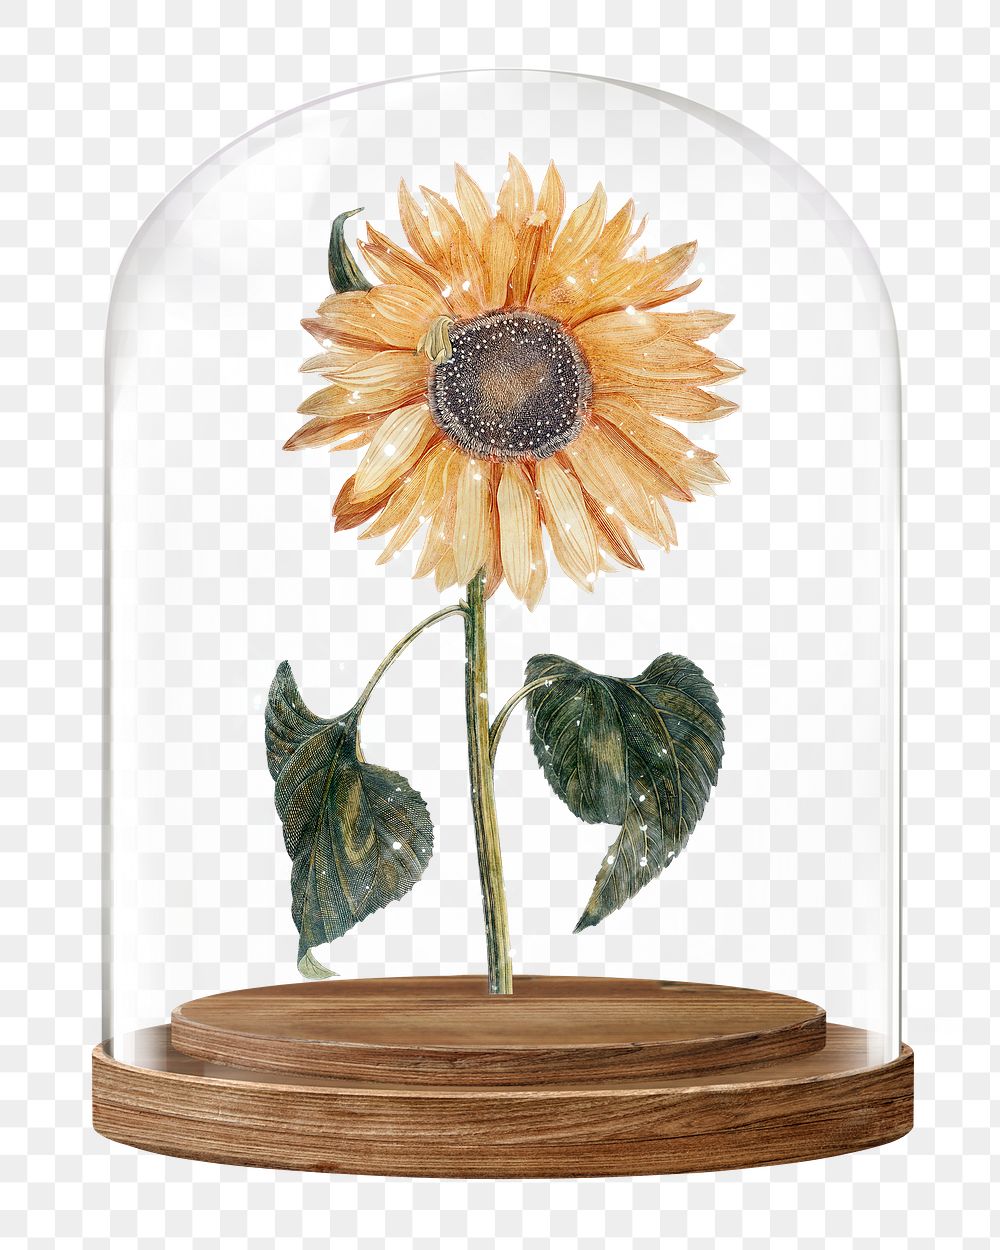 Sparkly sunflower png glass dome sticker, flower aesthetic concept art, transparent background